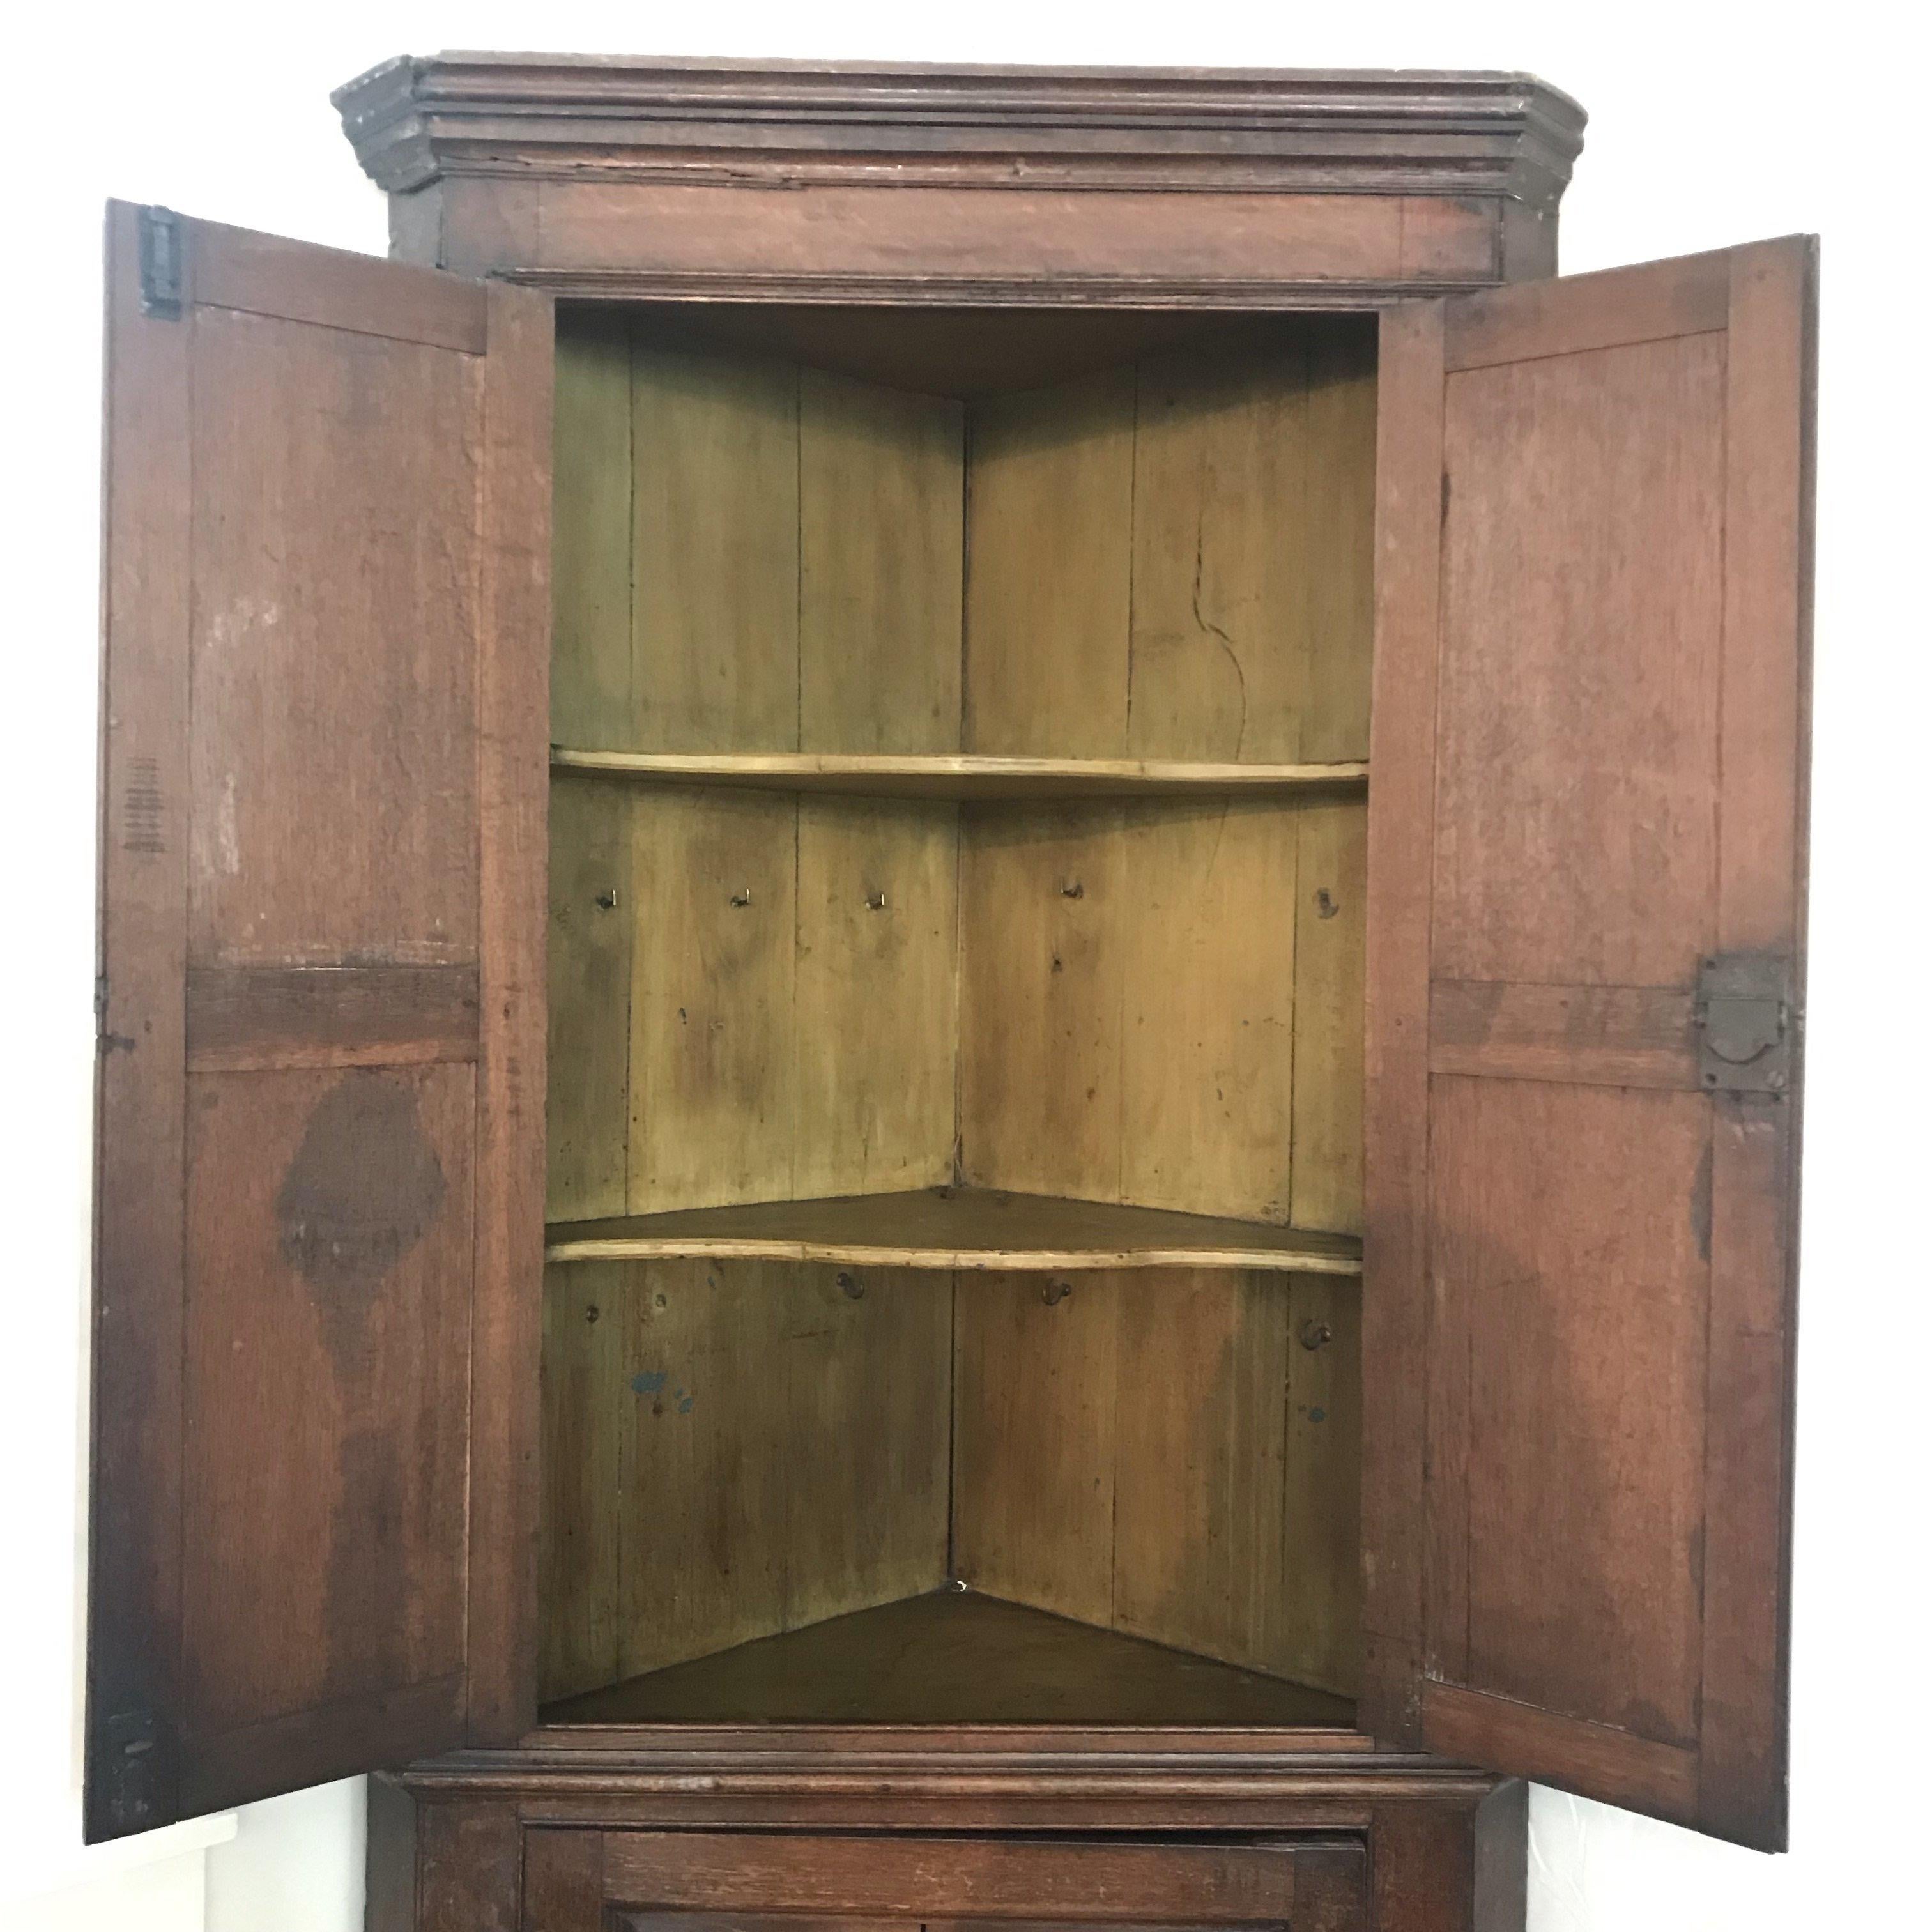 A George III oak double corner cupboard, the top border with classic carved molding, the interior shell shaped with three shelves on the upper section and two on the lower. Bought in the North of England, this super early antique Georgian British